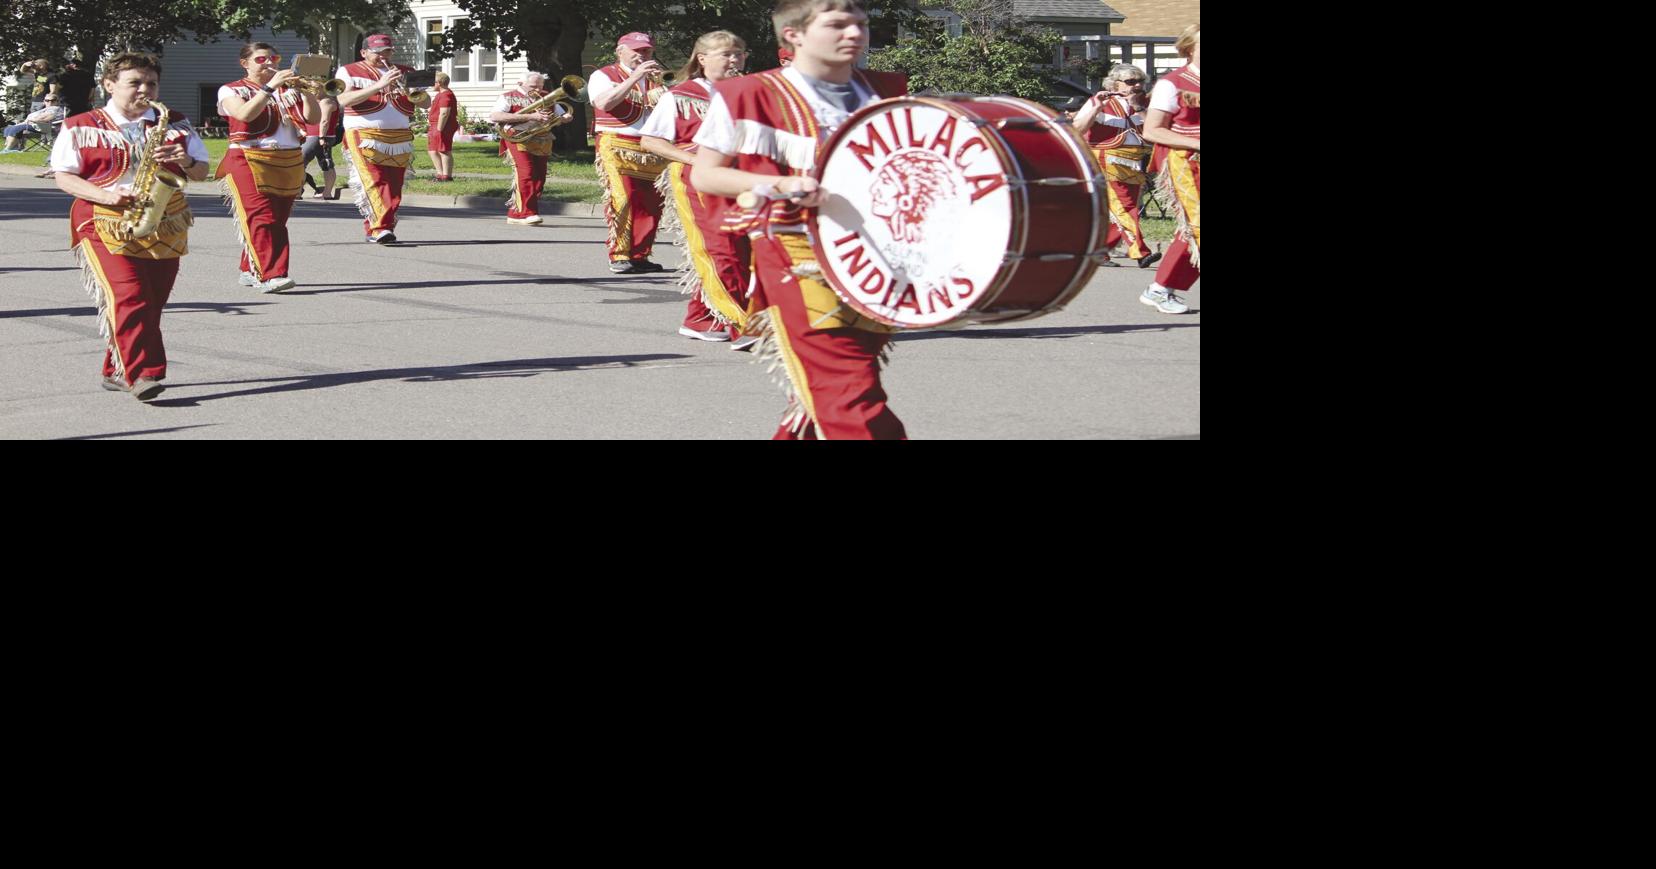 Milaca parade continues tradition, marches 23 bands Free